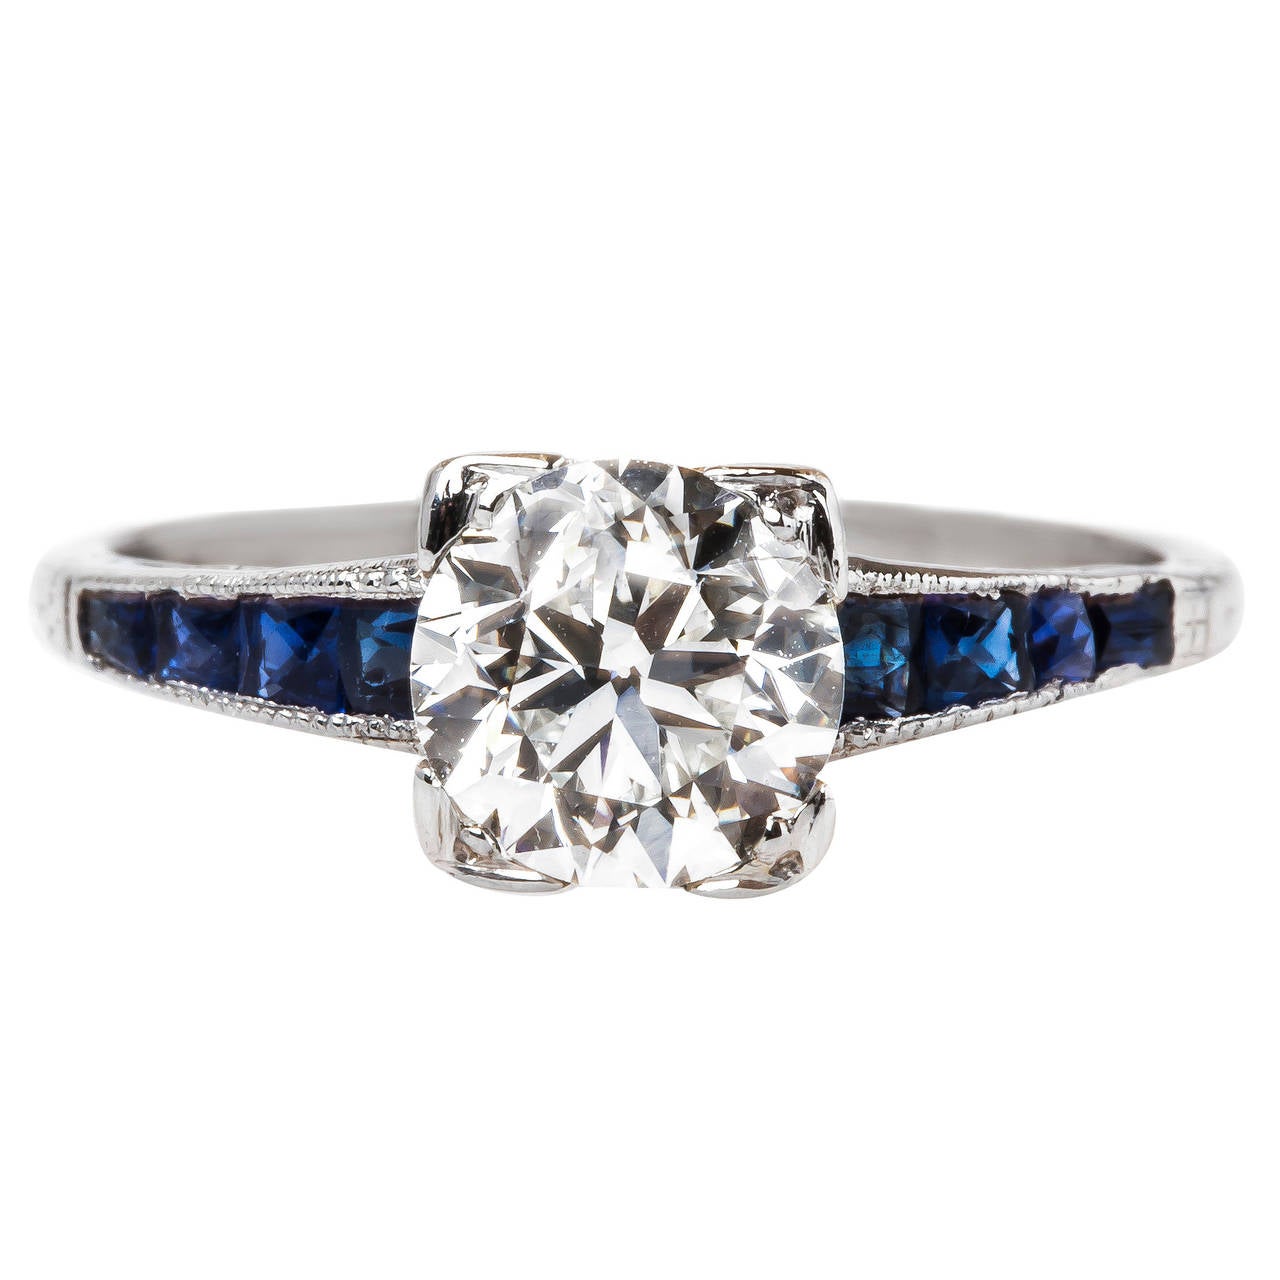 Incredibly Unique Art Deco Ring with Diamond and Sapphire Shoulders